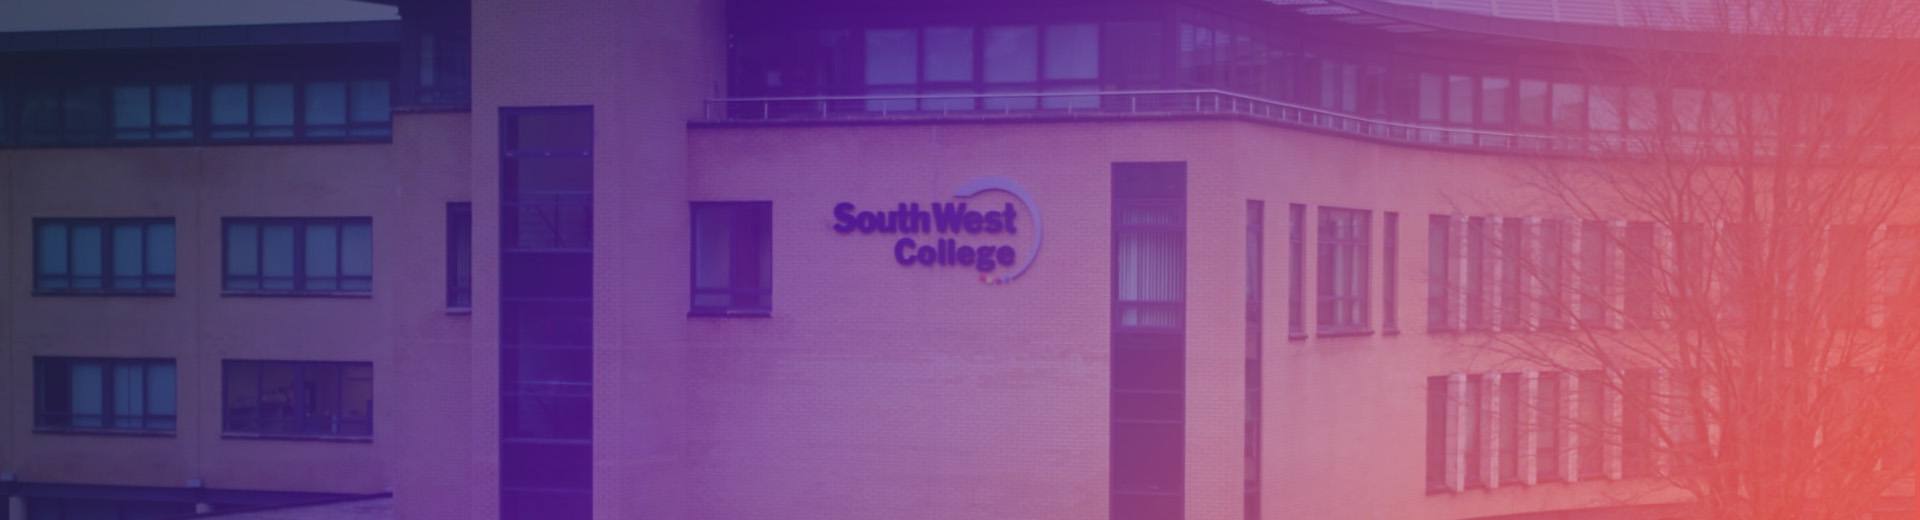 South West College building